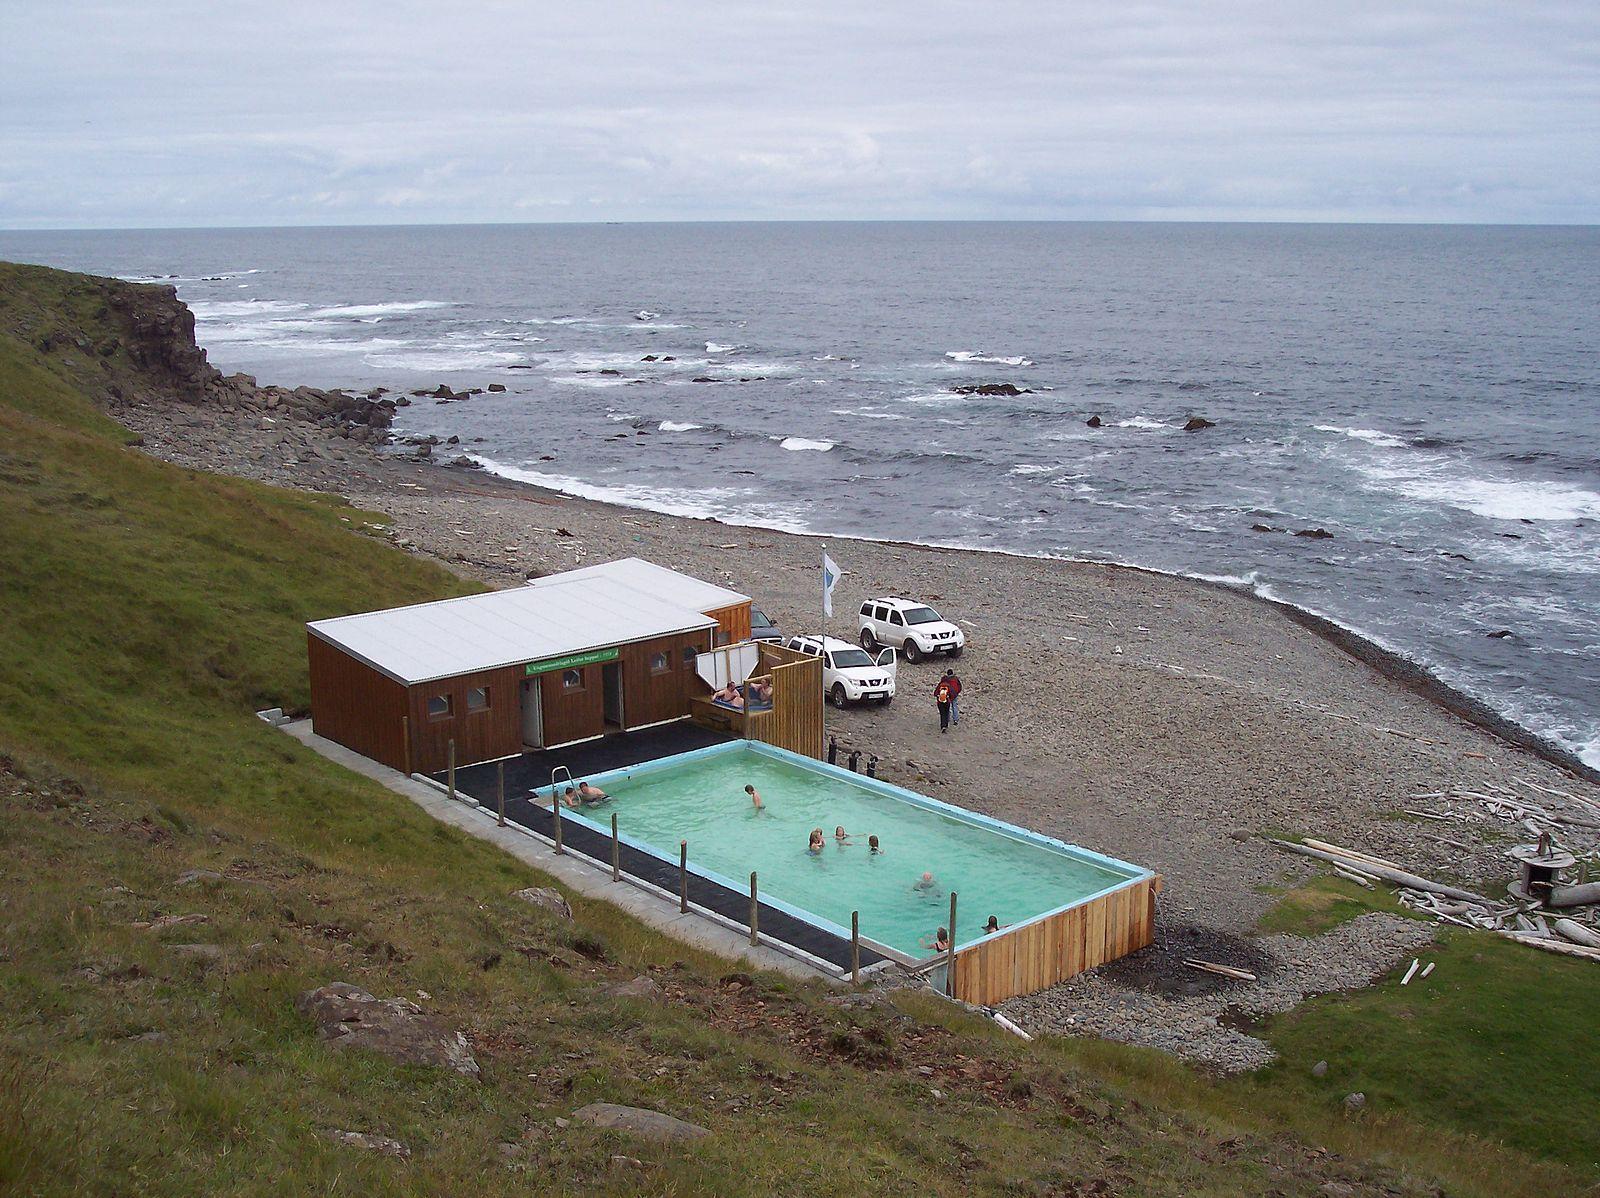 A picture of a remote swimming pool in Iceland